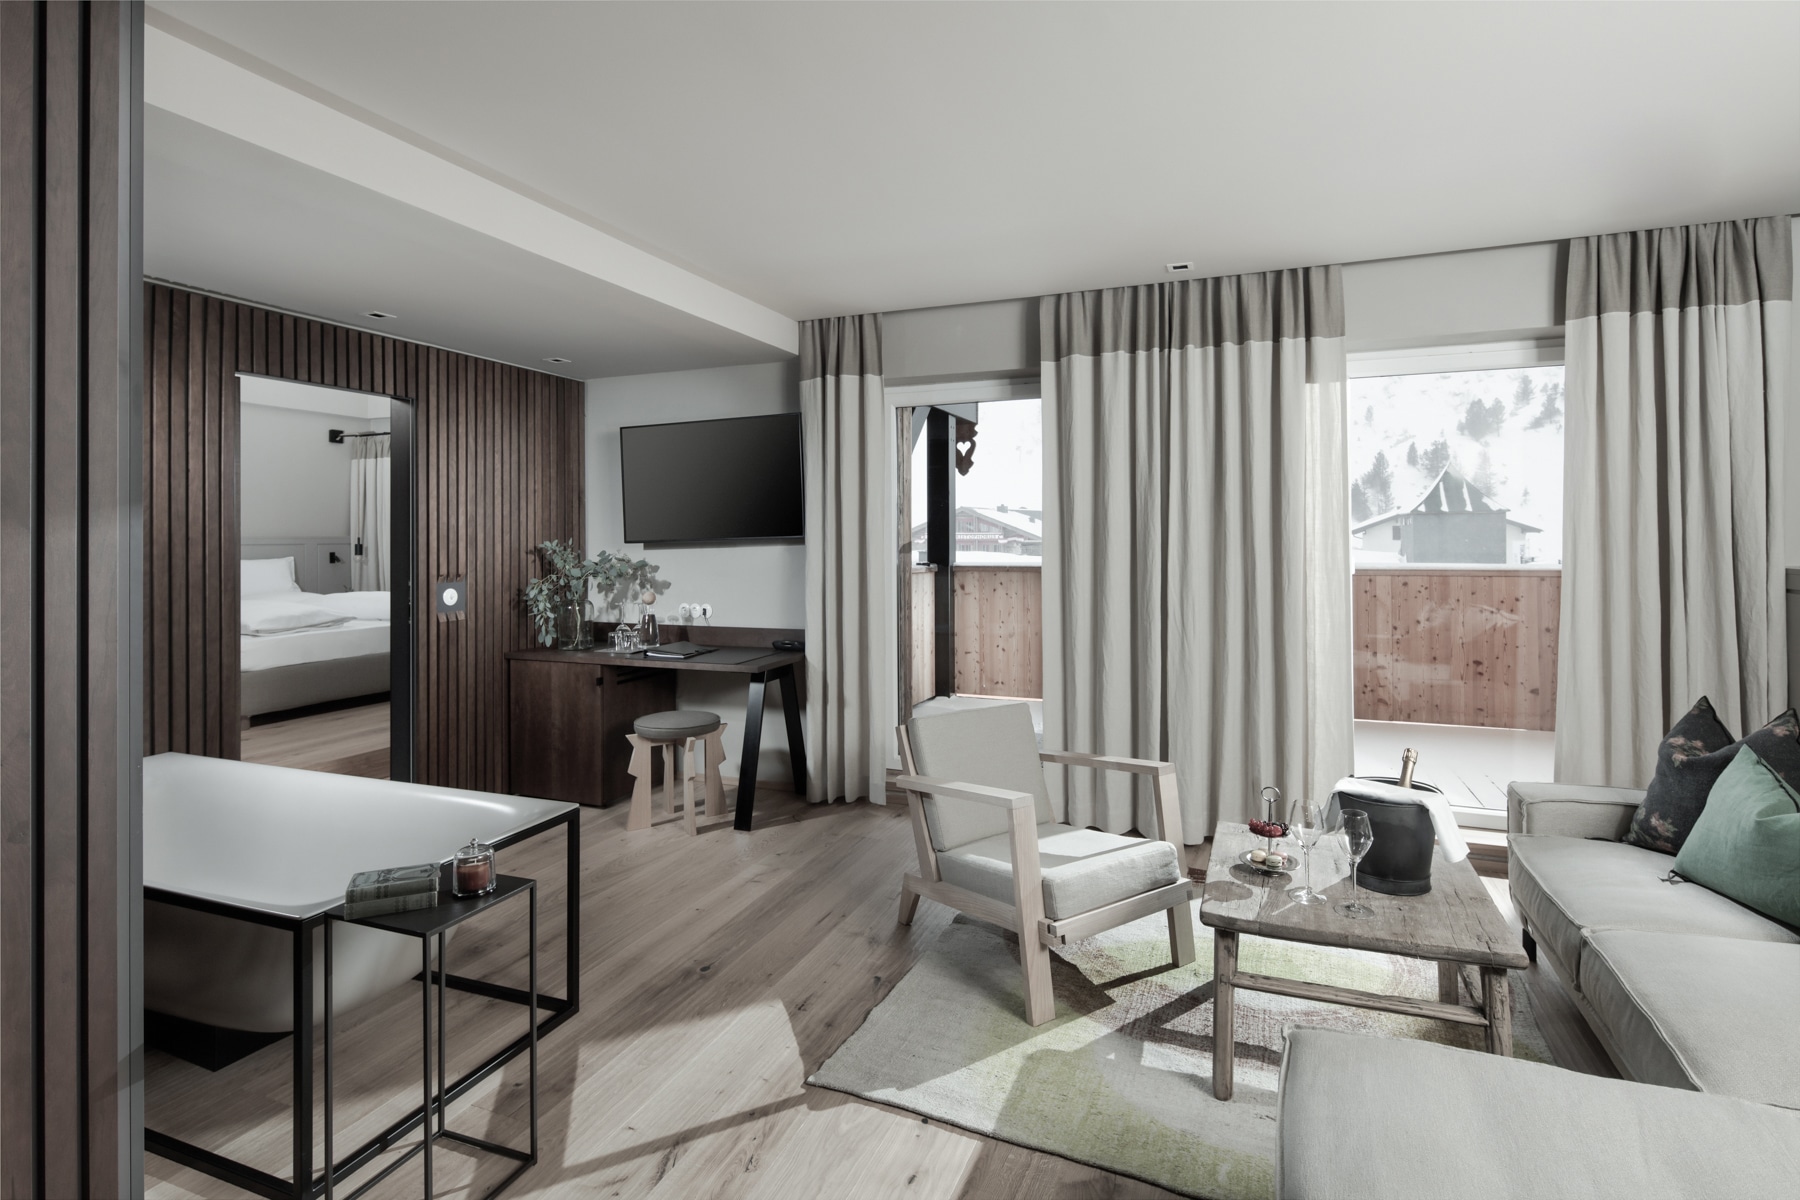 Modern and elegant hotel suite interior with a seamless transition from the inviting living area to the cozy bedroom, featuring neutral tones and contemporary furnishings, offering guests a tranquil retreat with a view of the mountainous landscape.